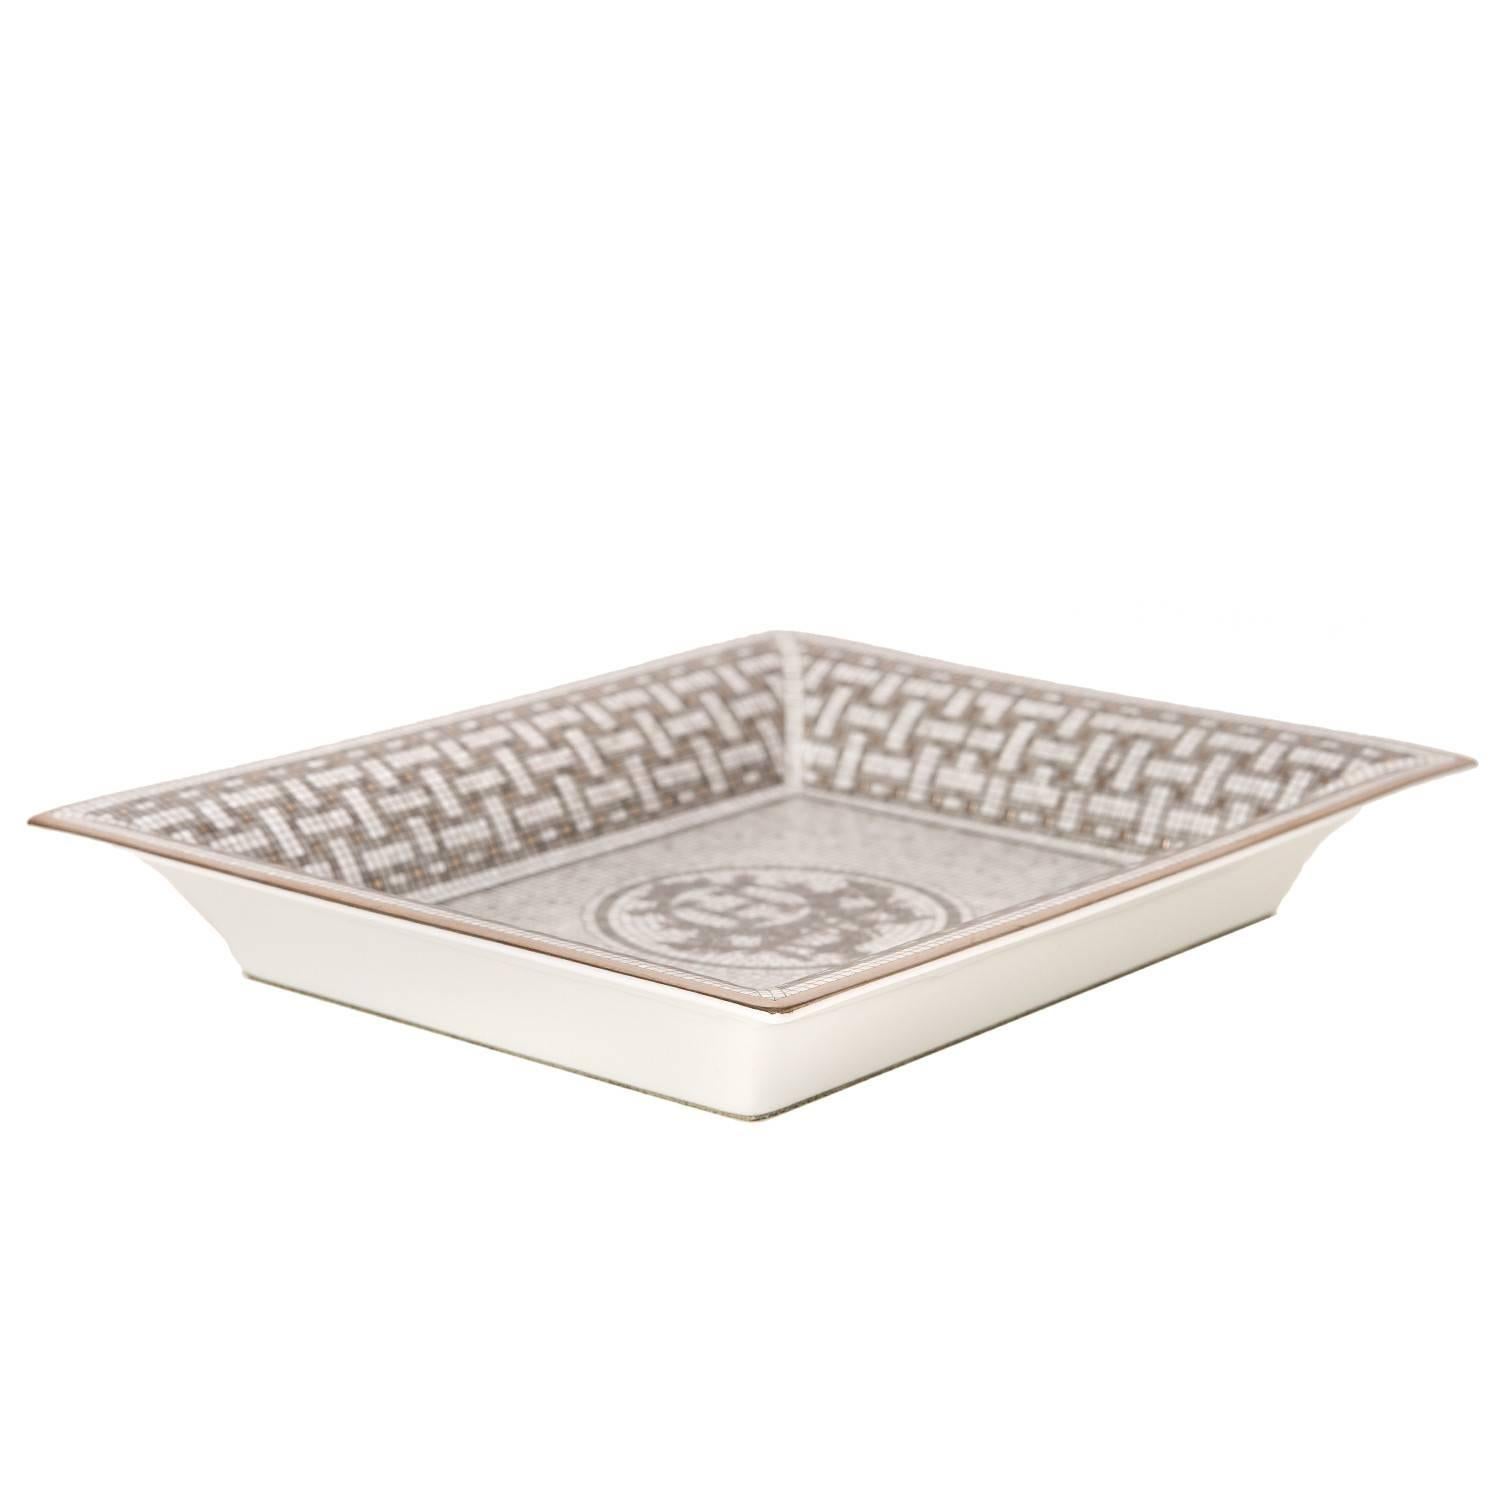 Hermes Mosaique au 24 Tray of porcelain in platinum pattern.

The Hermes Mosaique au 24 Tray is a tribute to the birthplace of Hermes: 24 Faubourg Saint Honore in Paris. Taking you to the heart of the boutique's architecture, where each decoration